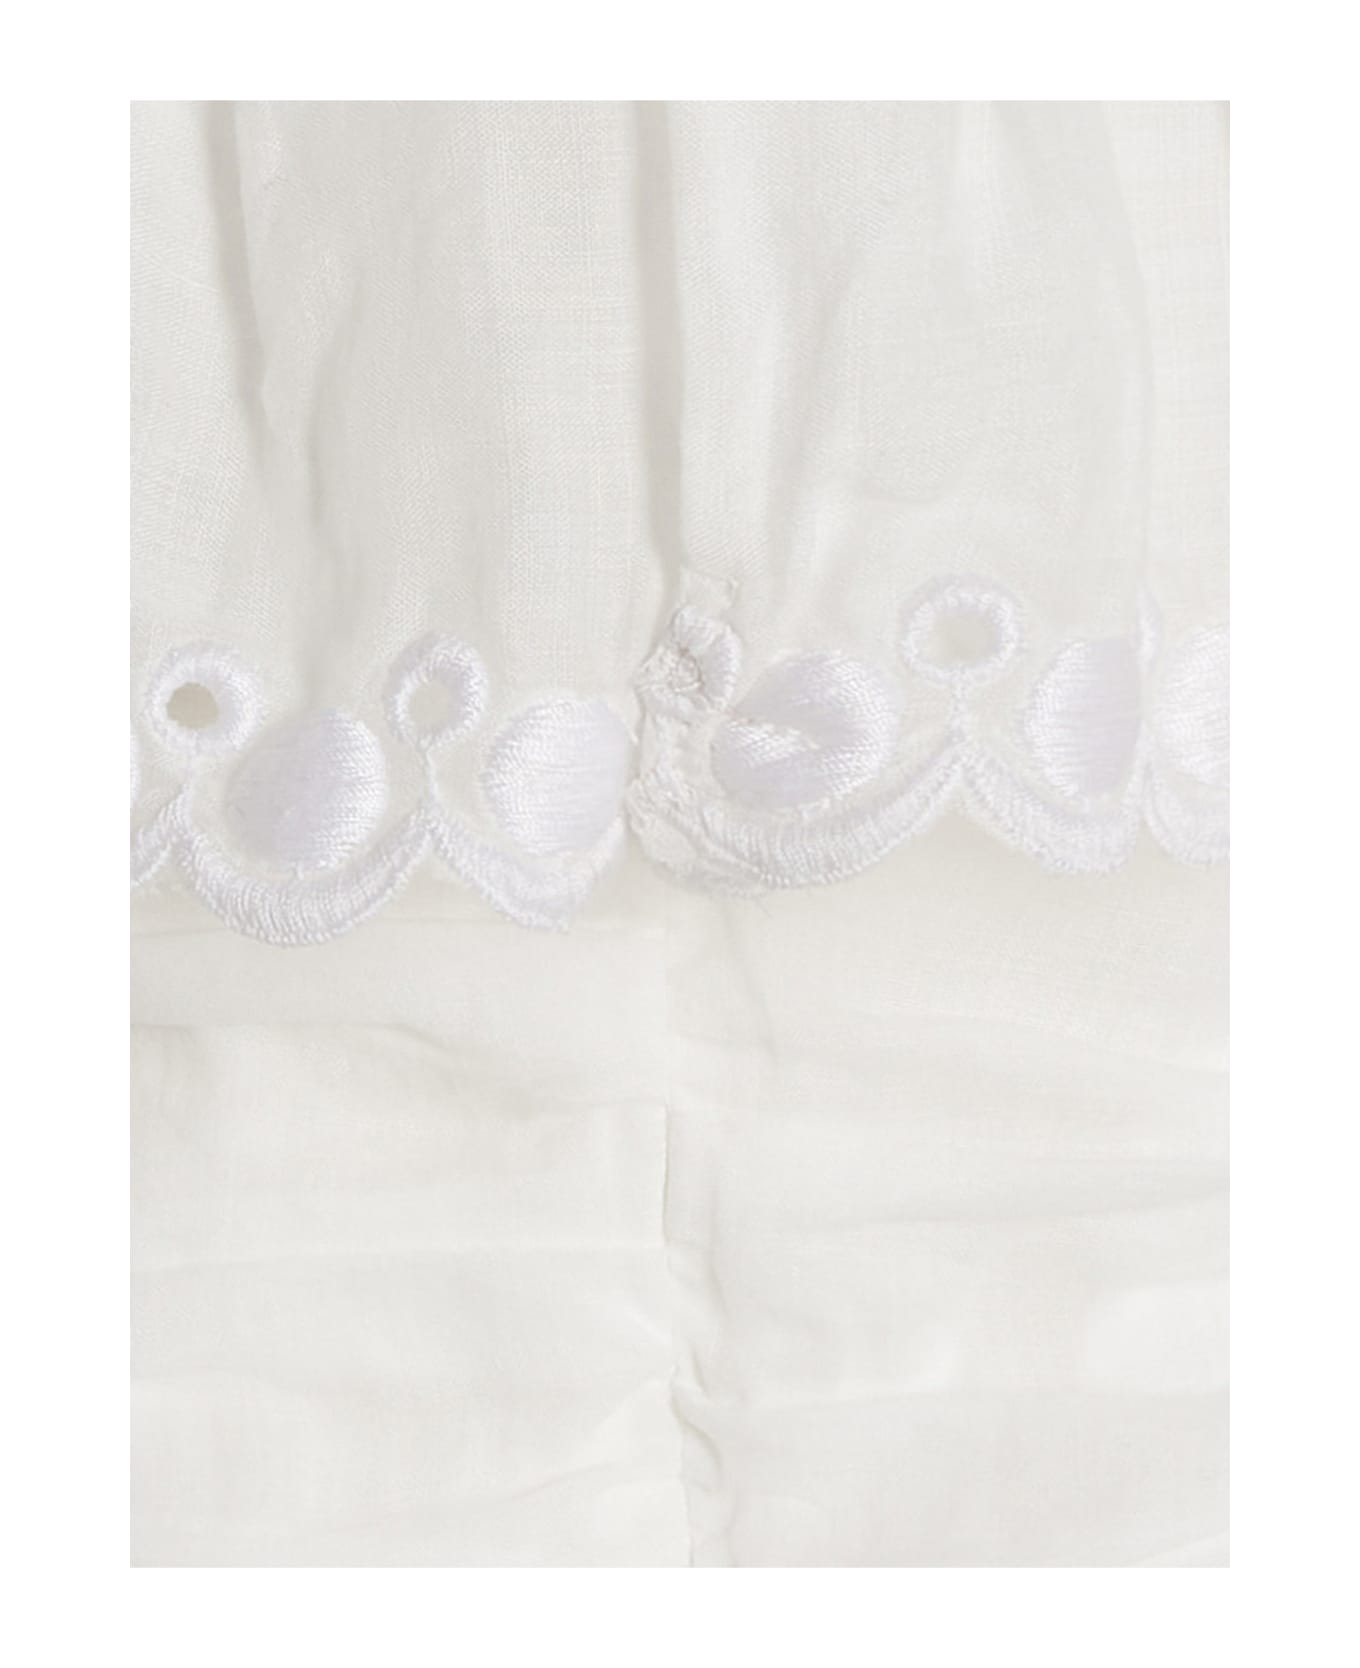 Isabel Marant 'orma' Top - White